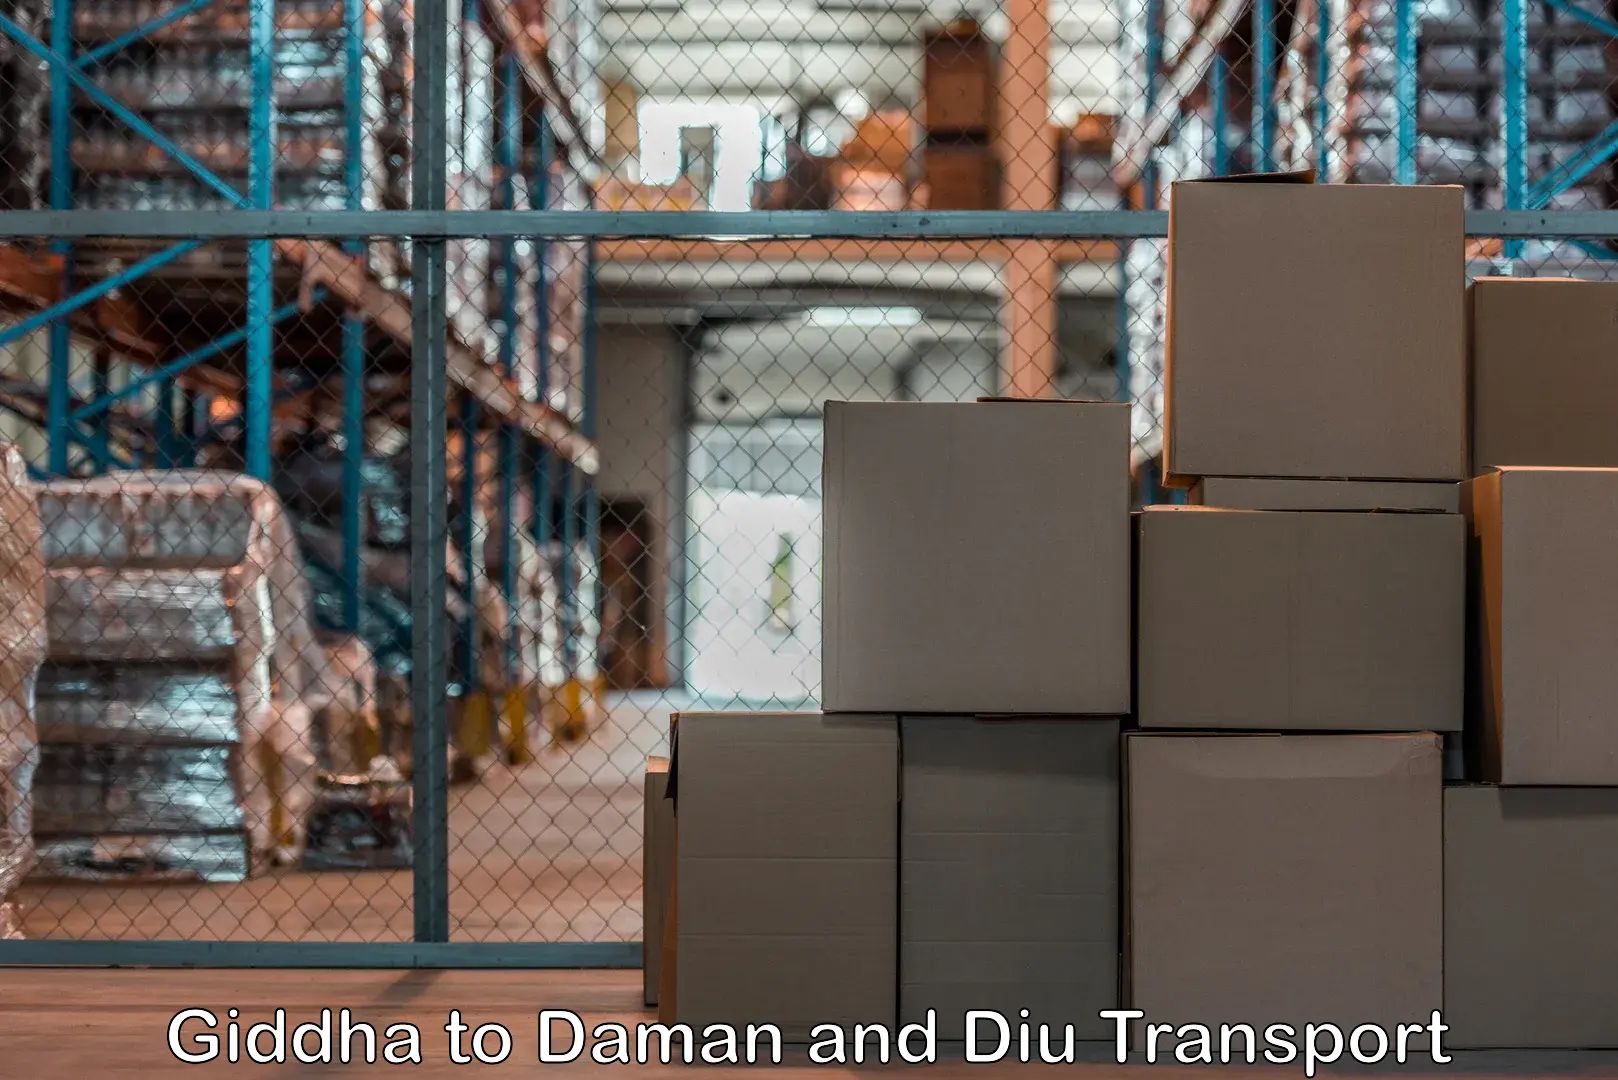 Container transport service Giddha to Daman and Diu